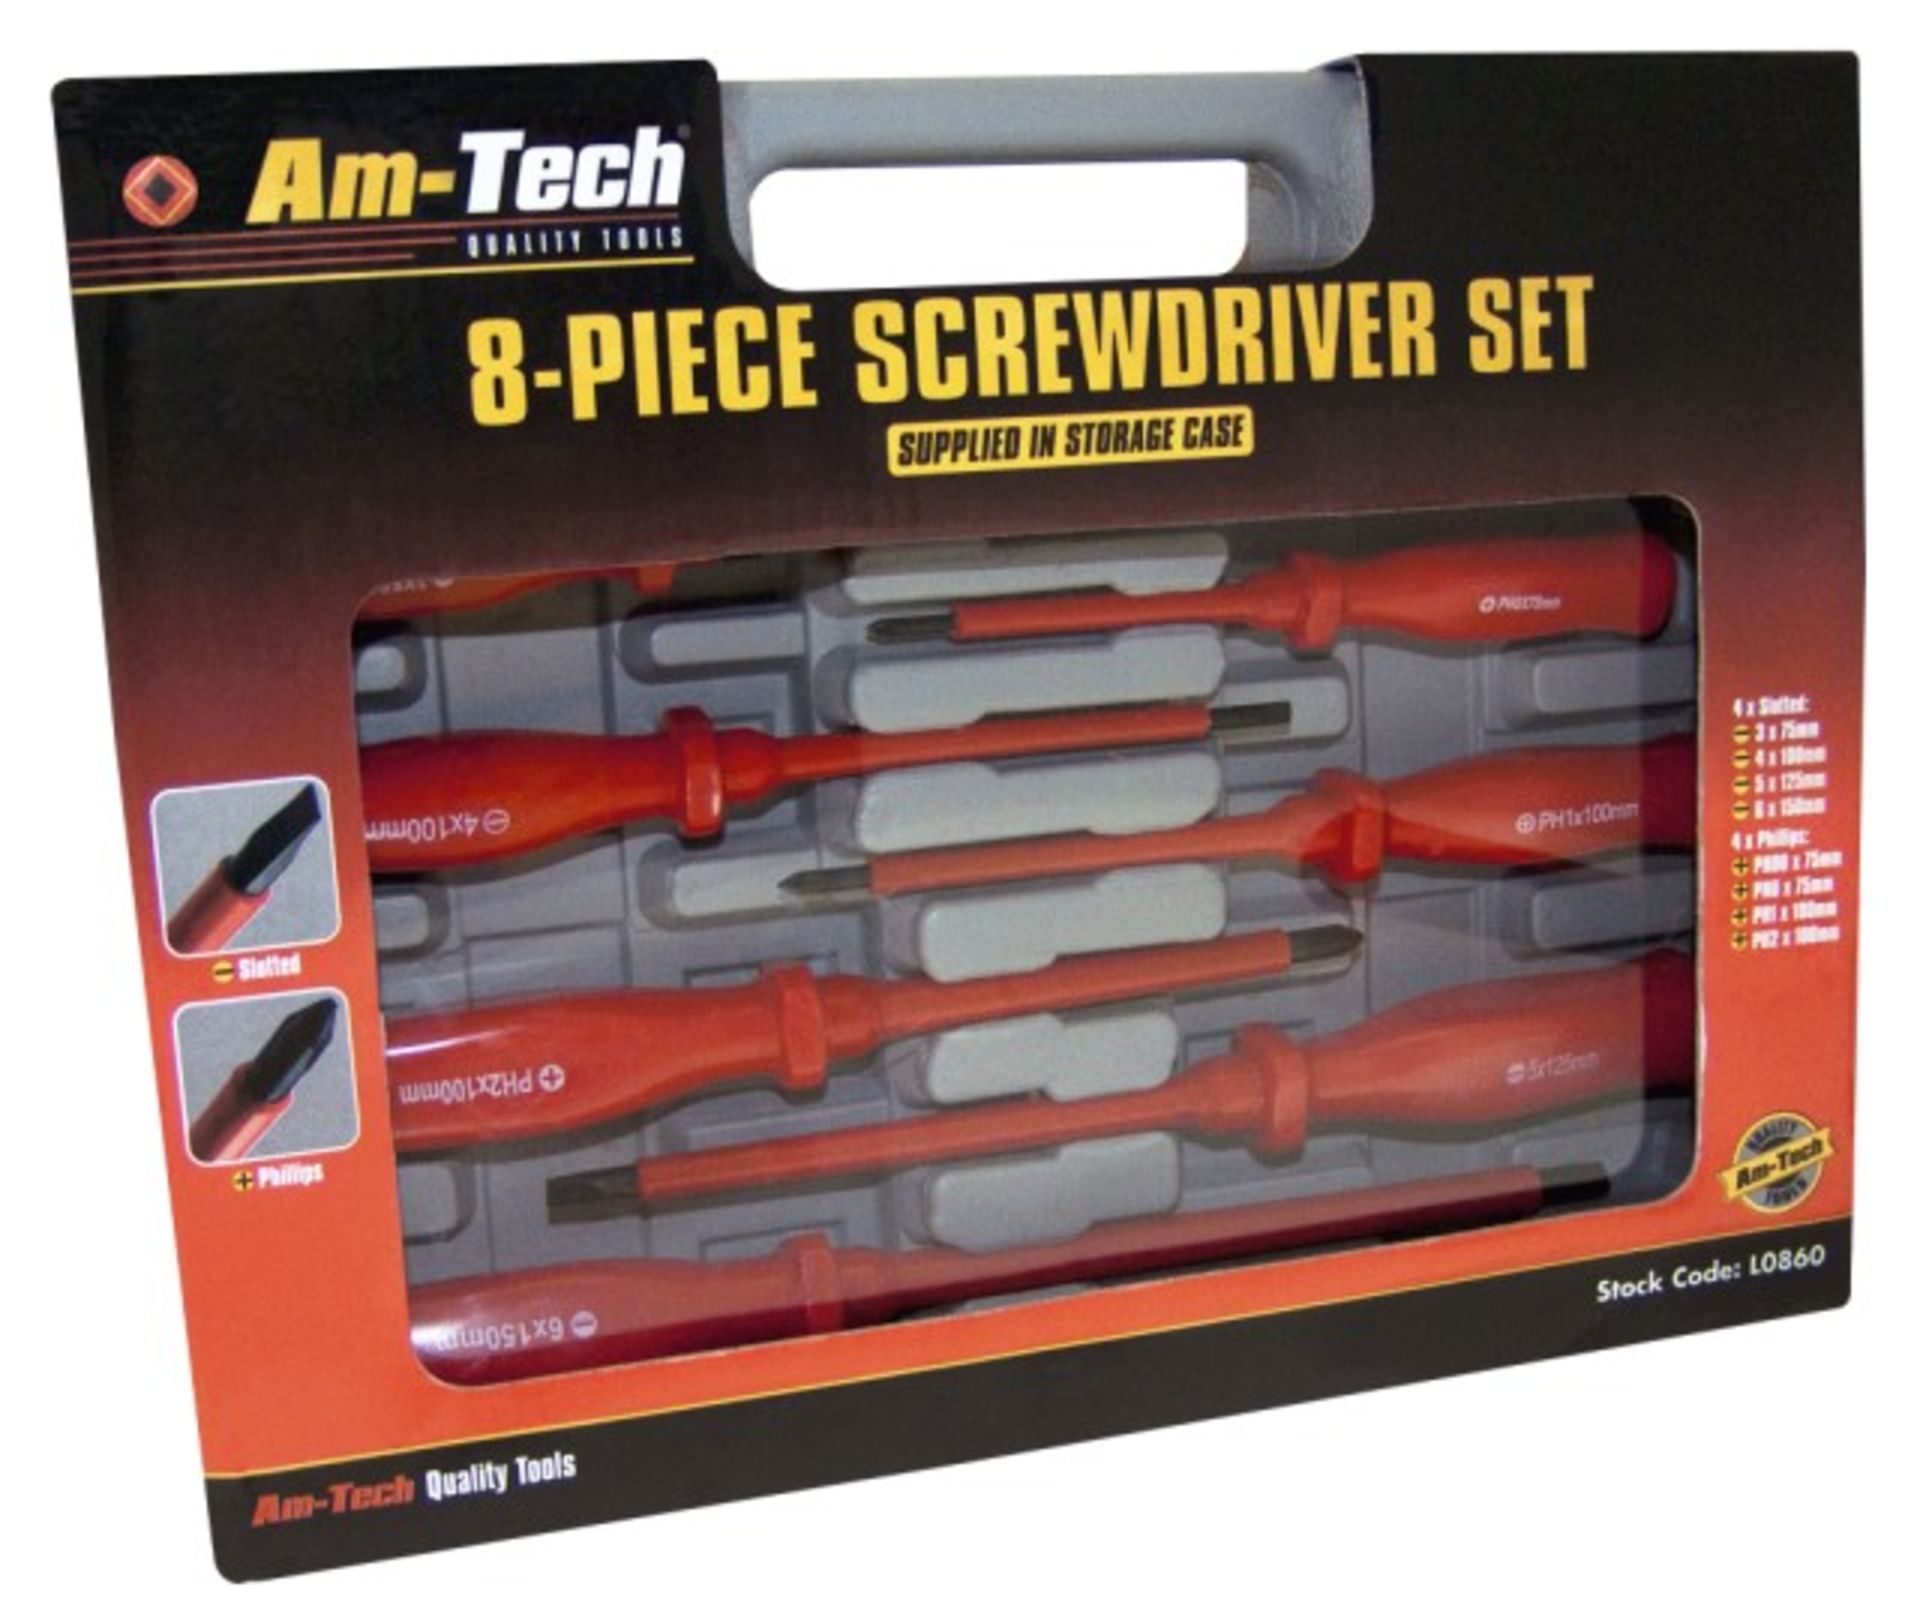 V Brand New Eight Piece Screwdriver Set In Carry case X 2 YOUR BID PRICE TO BE MULTIPLIED BY TWO